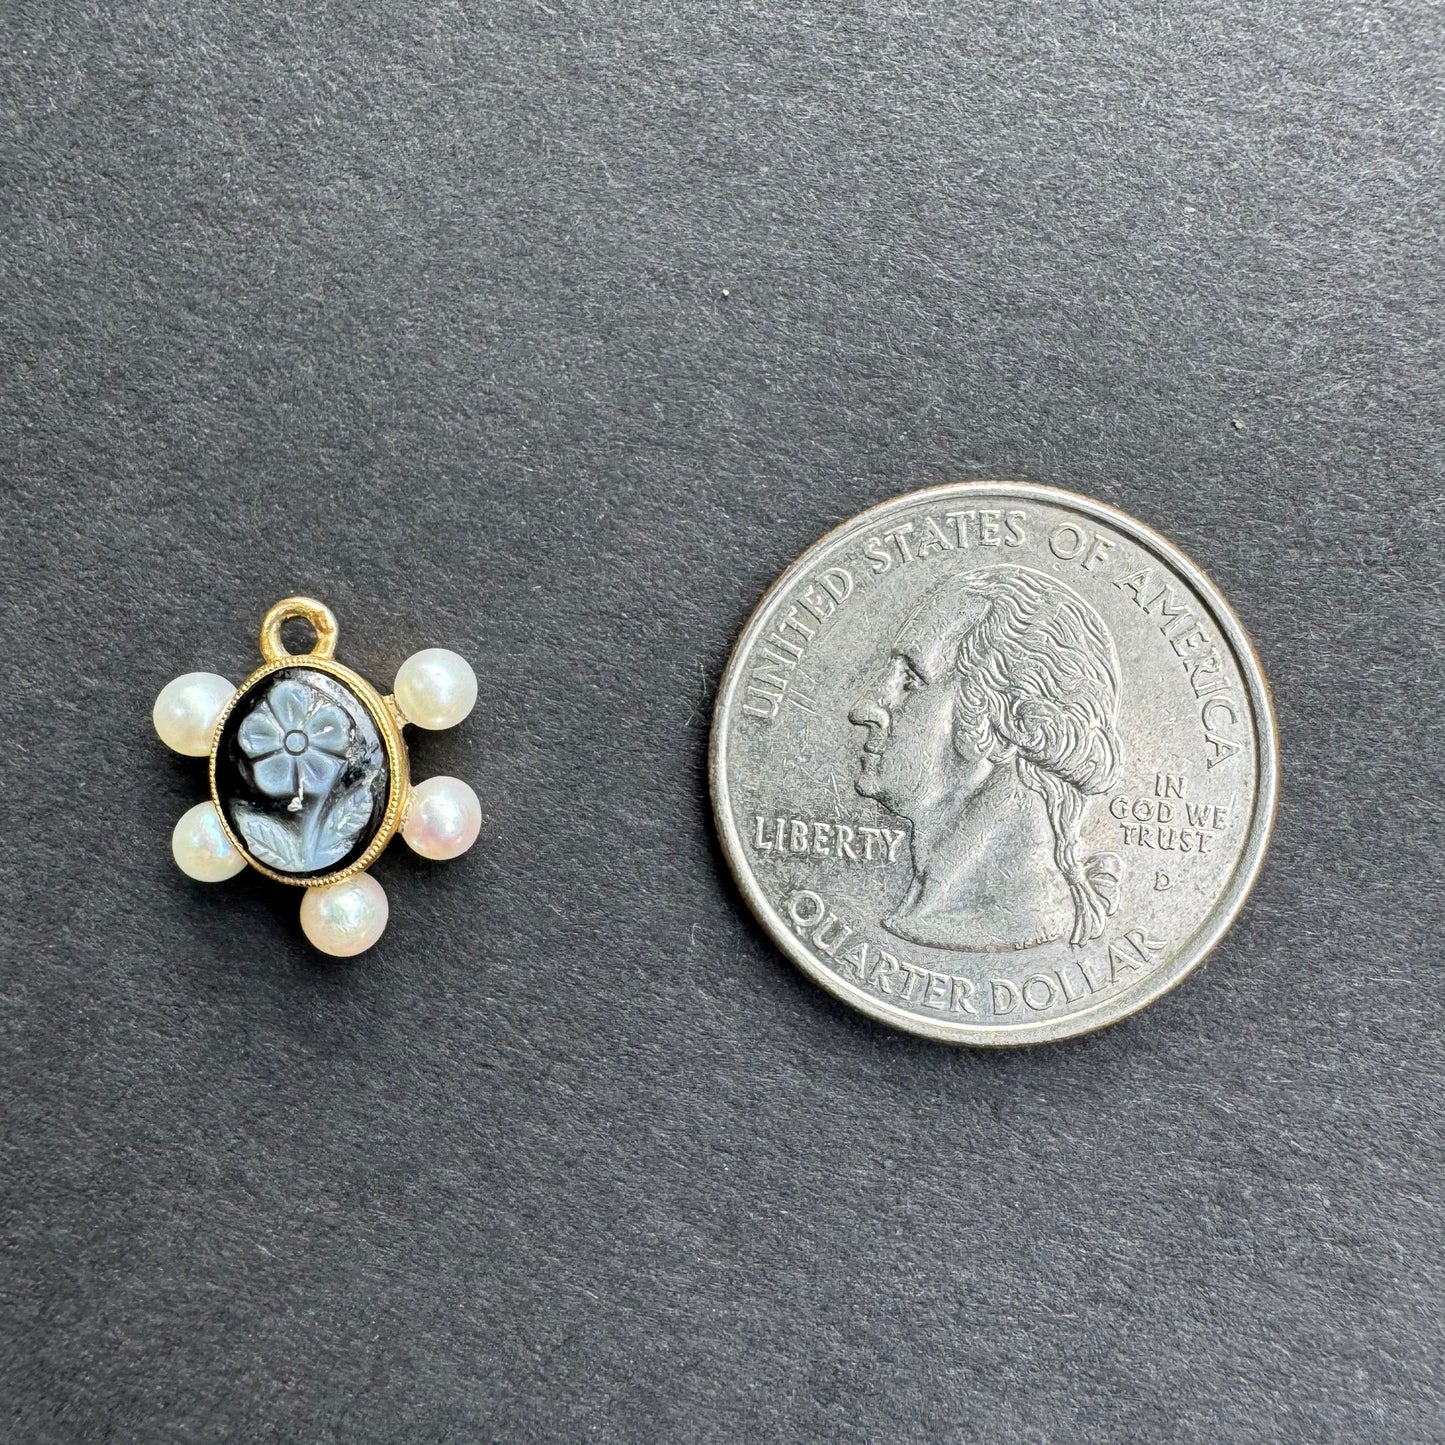 Hardstone Flower Intaglio and Pearl Victorian Mourning Charm